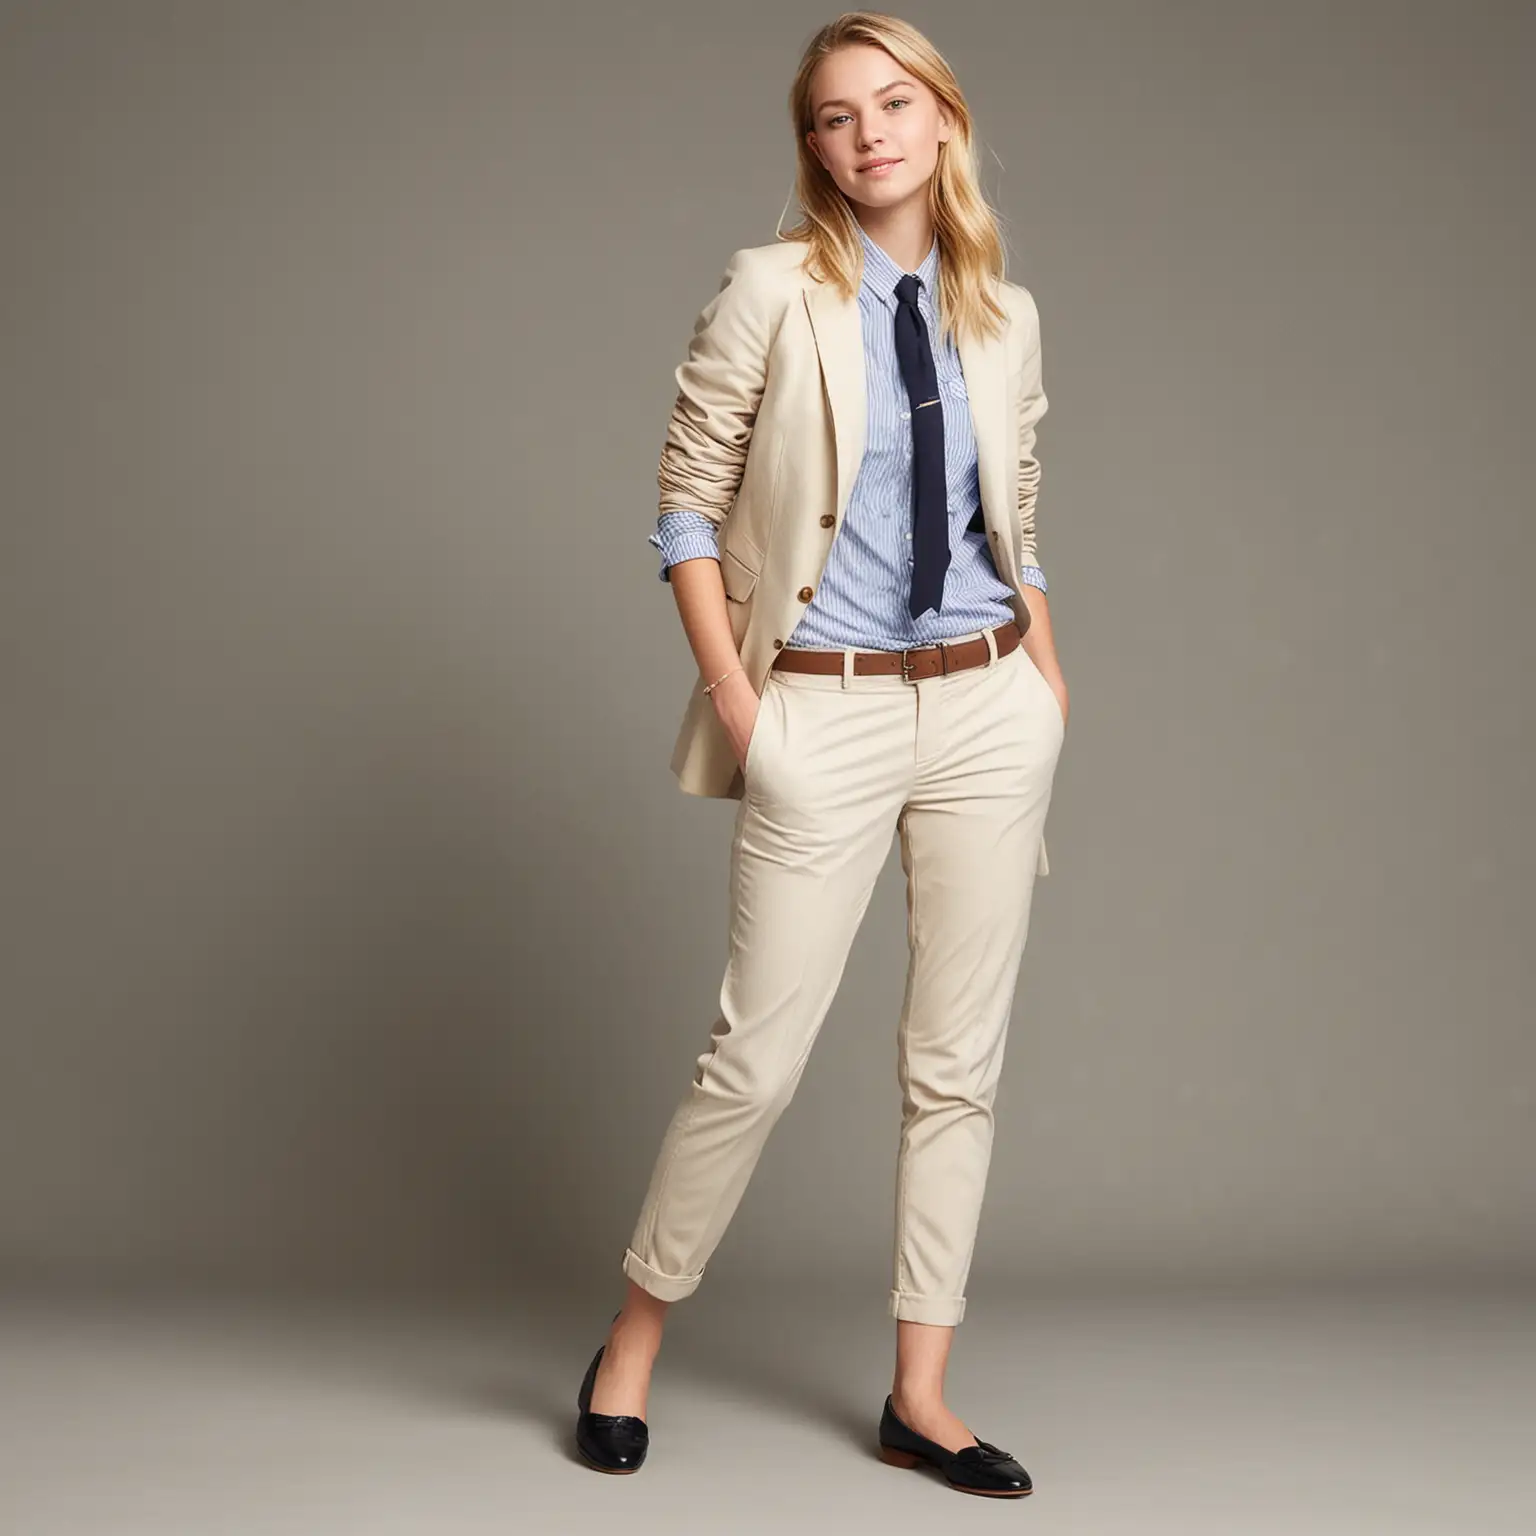 blonde hair teenage girl with tailored  j crew style outfit for a job interview. should look like a teen girl full body outfit with flats for shoes. 
